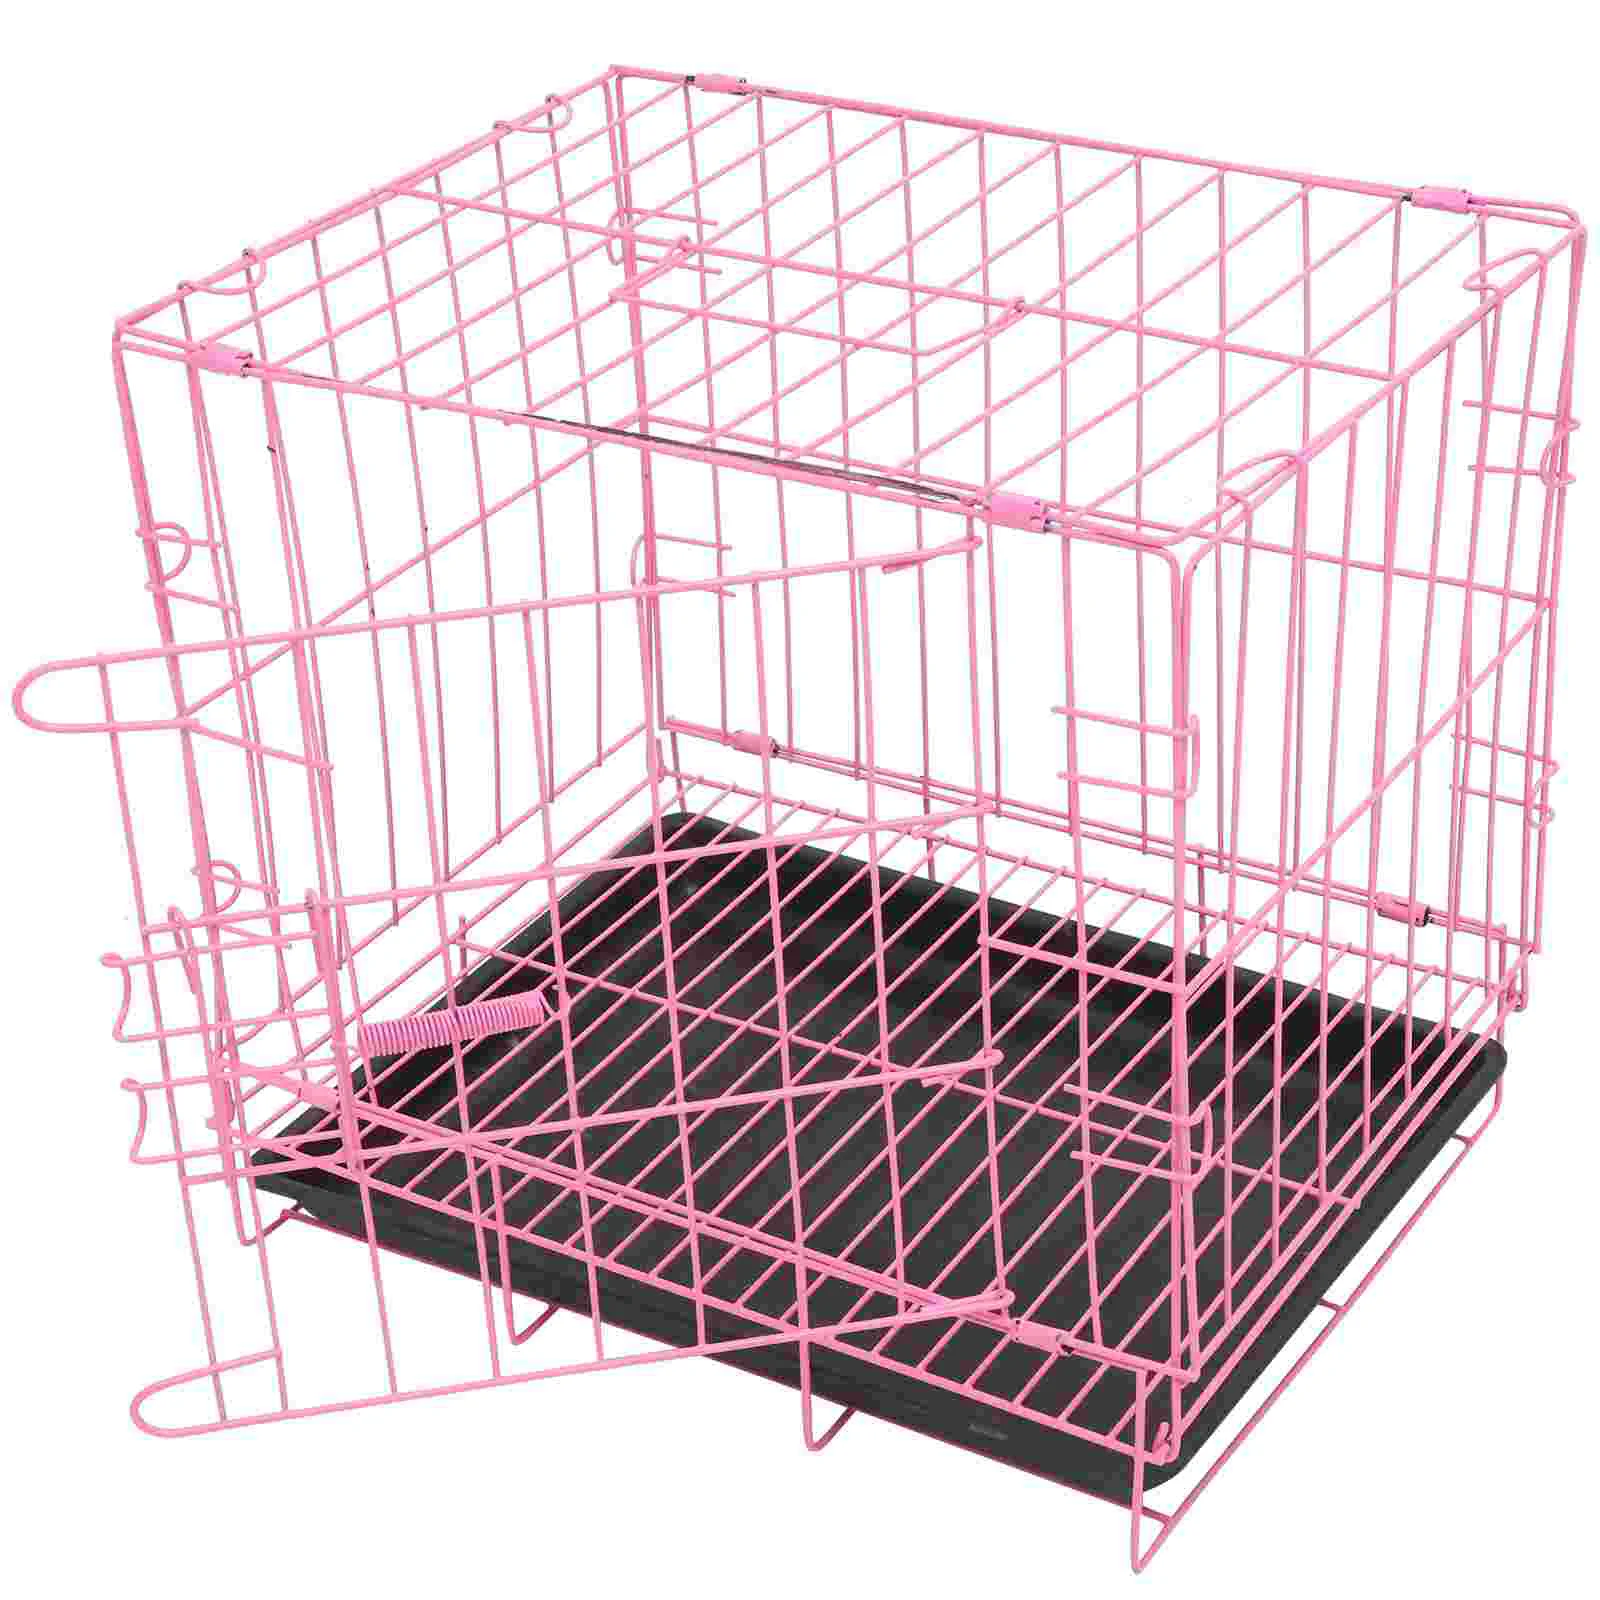 

Kennel Folding Cage, 1 Pc Pets Crate Folding Metal Crate Foldable Single Cage|35x26x34cm